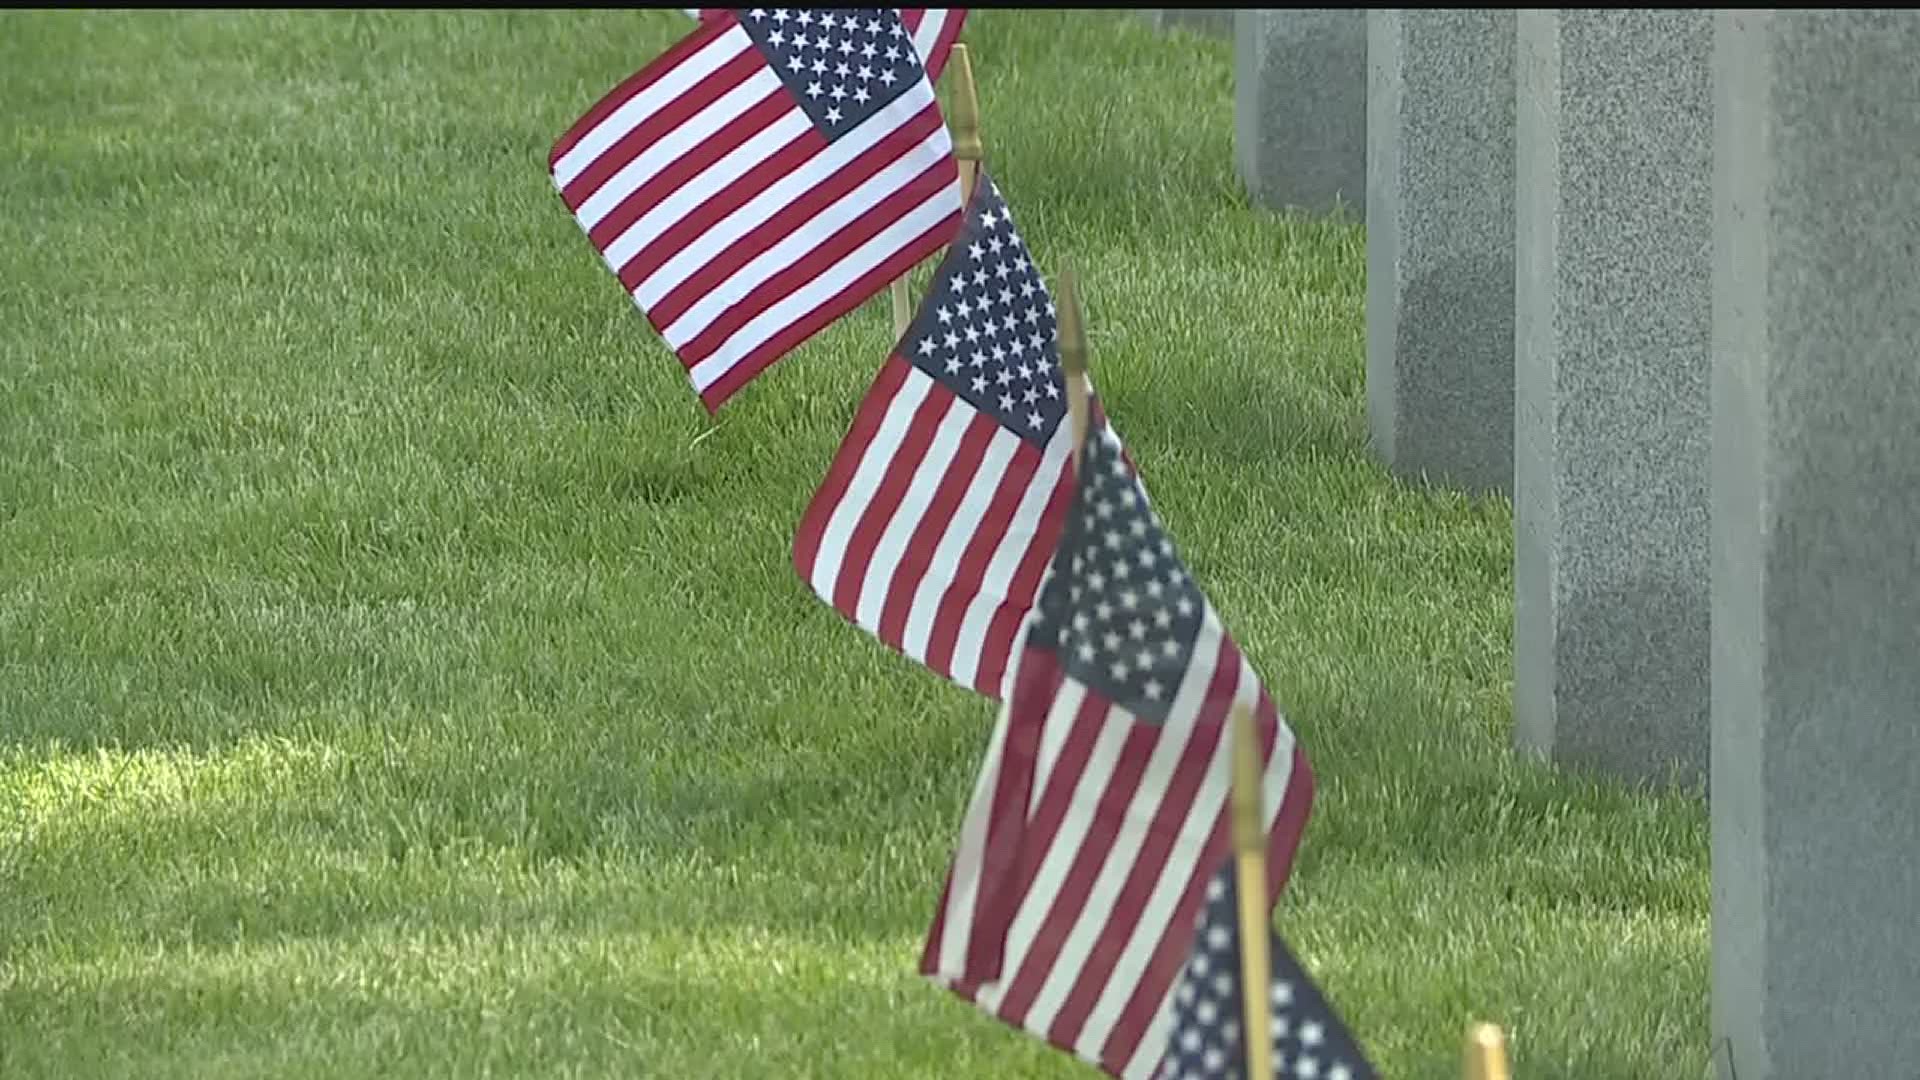 Here's what you need to know about Memorial Day restrictions in Rock Island.